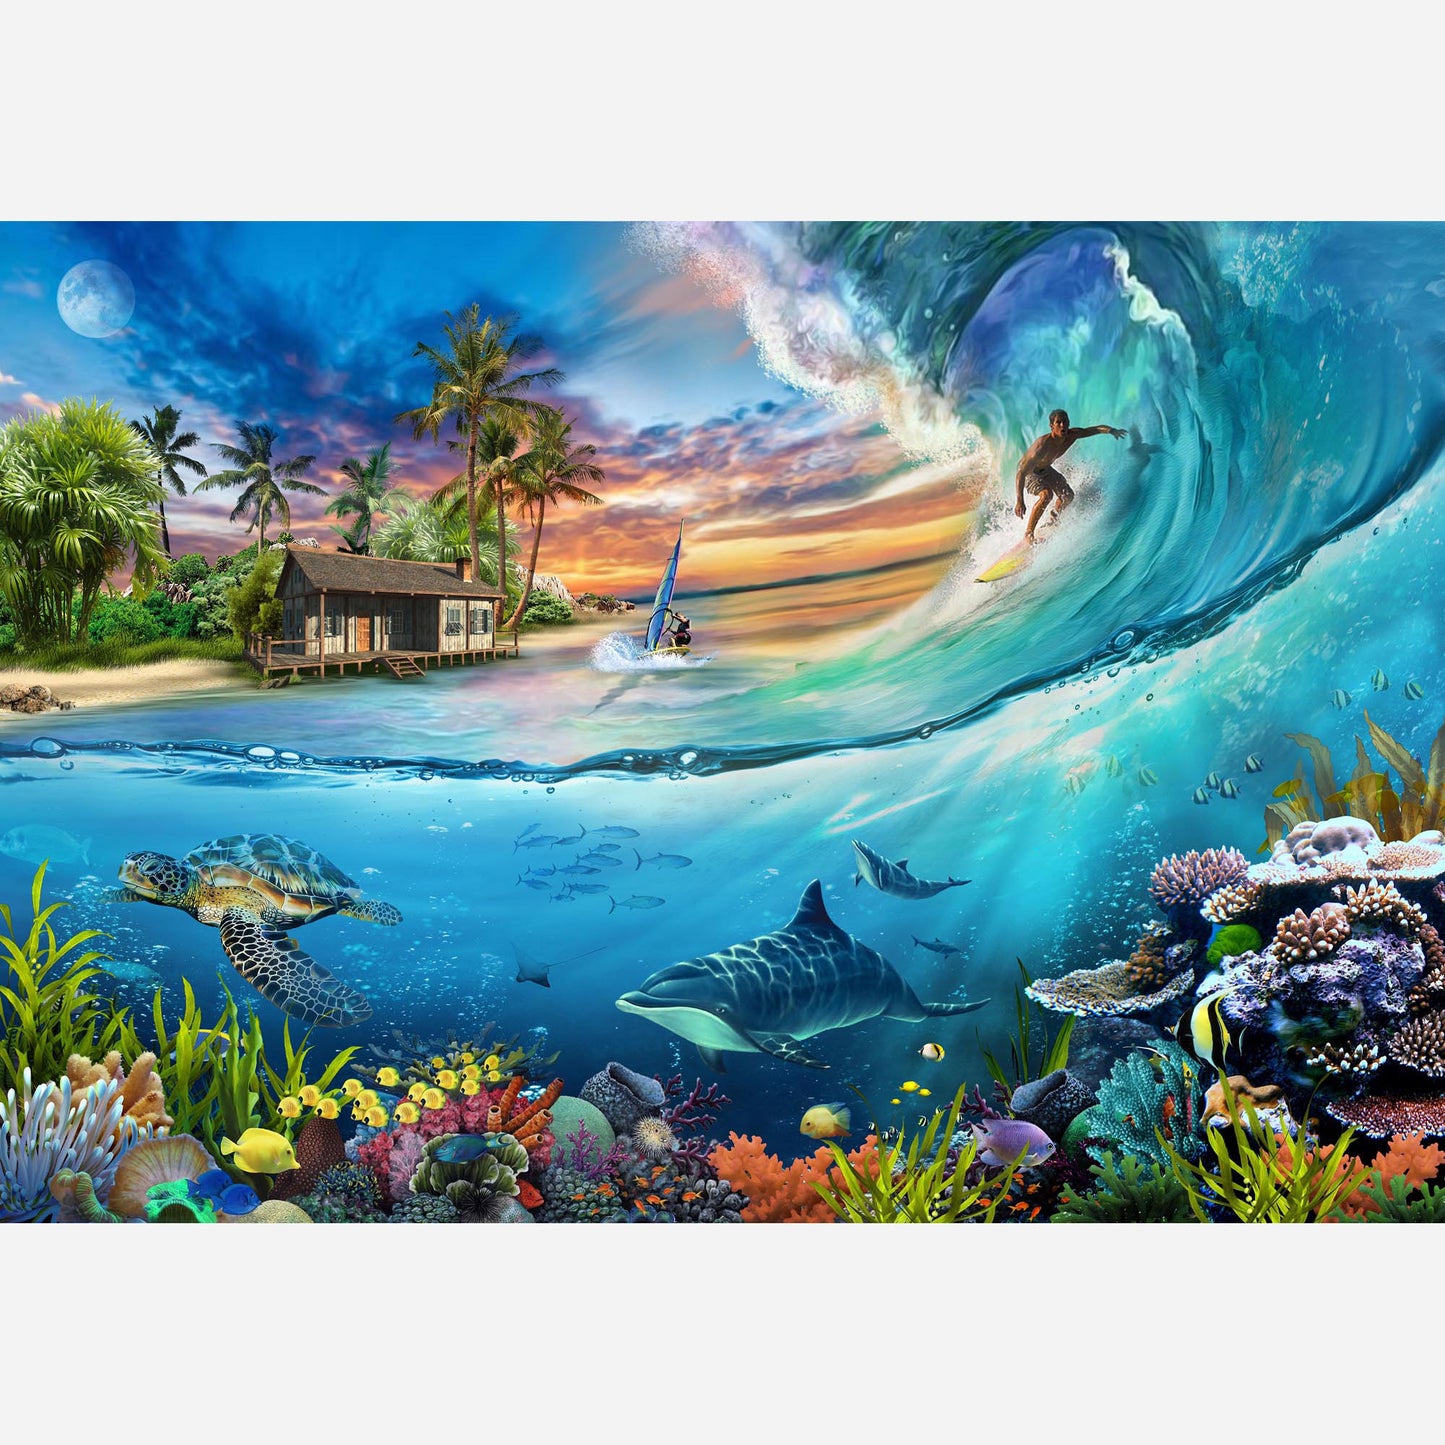 surf is up funbox puzzle 500 image